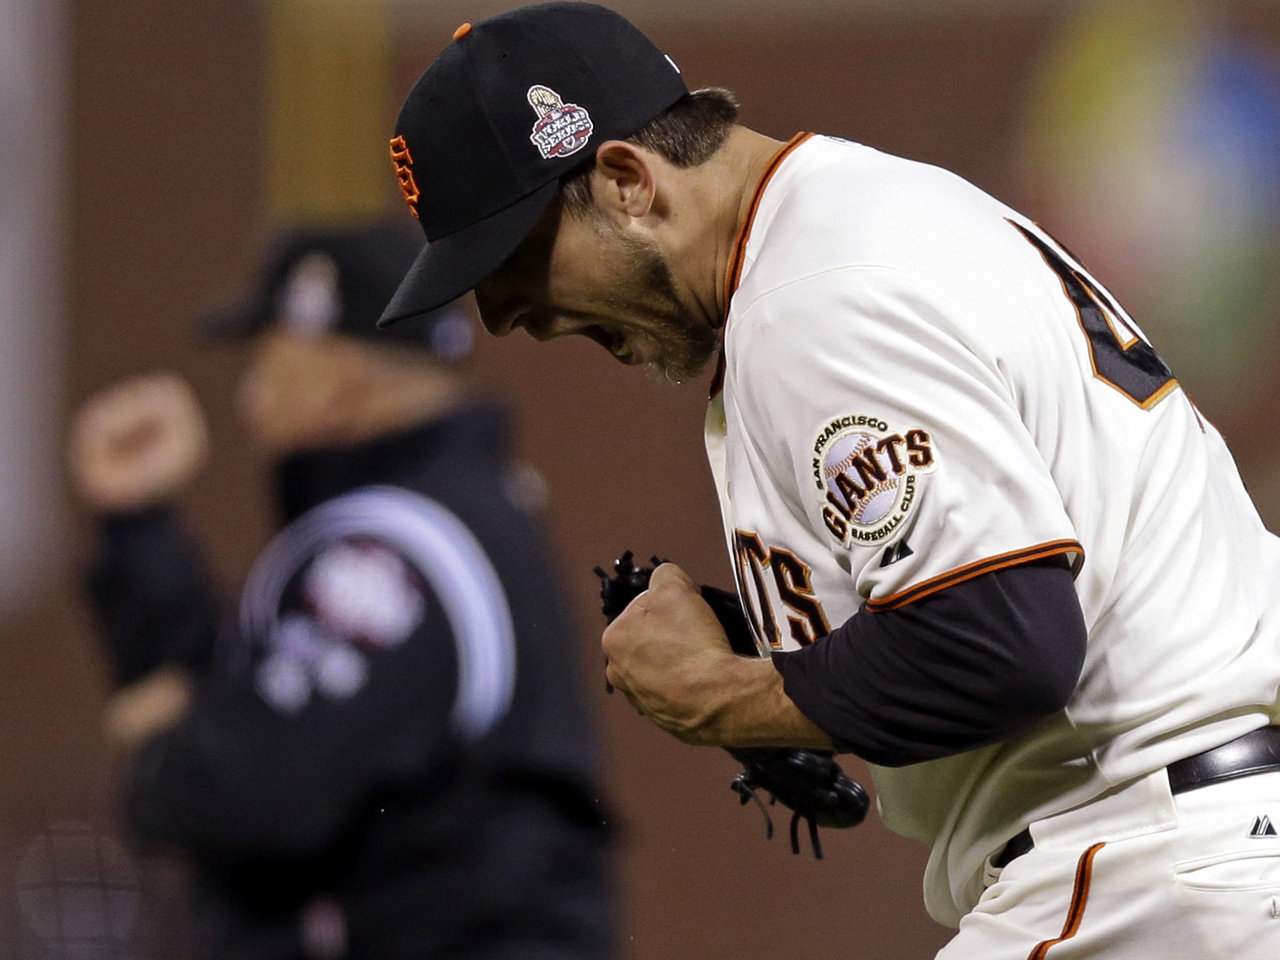 WORLD SERIES: Bumgarner pitches Giants to within a win of title